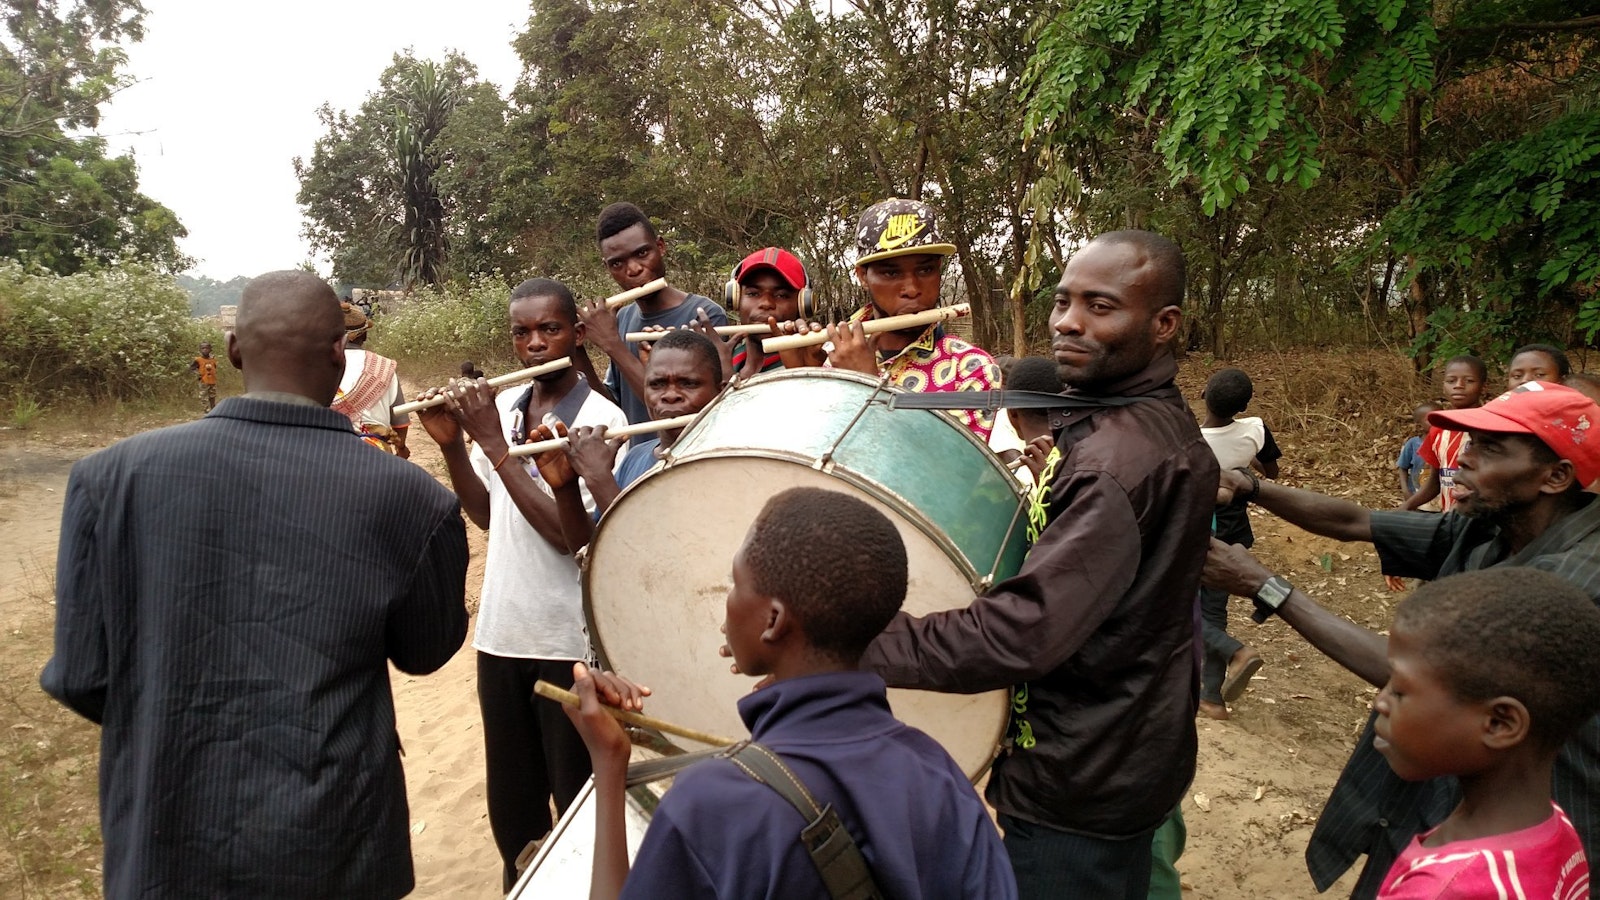 The townspeople of Yassa await the arrival of members of Friends of the Congo to their village with drums and music for the dedication of the women's clinic in July 2019. Fr. Ikanga, who grew up in the small village, said he hopes Catholics in the U.S. will not forget those far away whose needs are basic, and many.